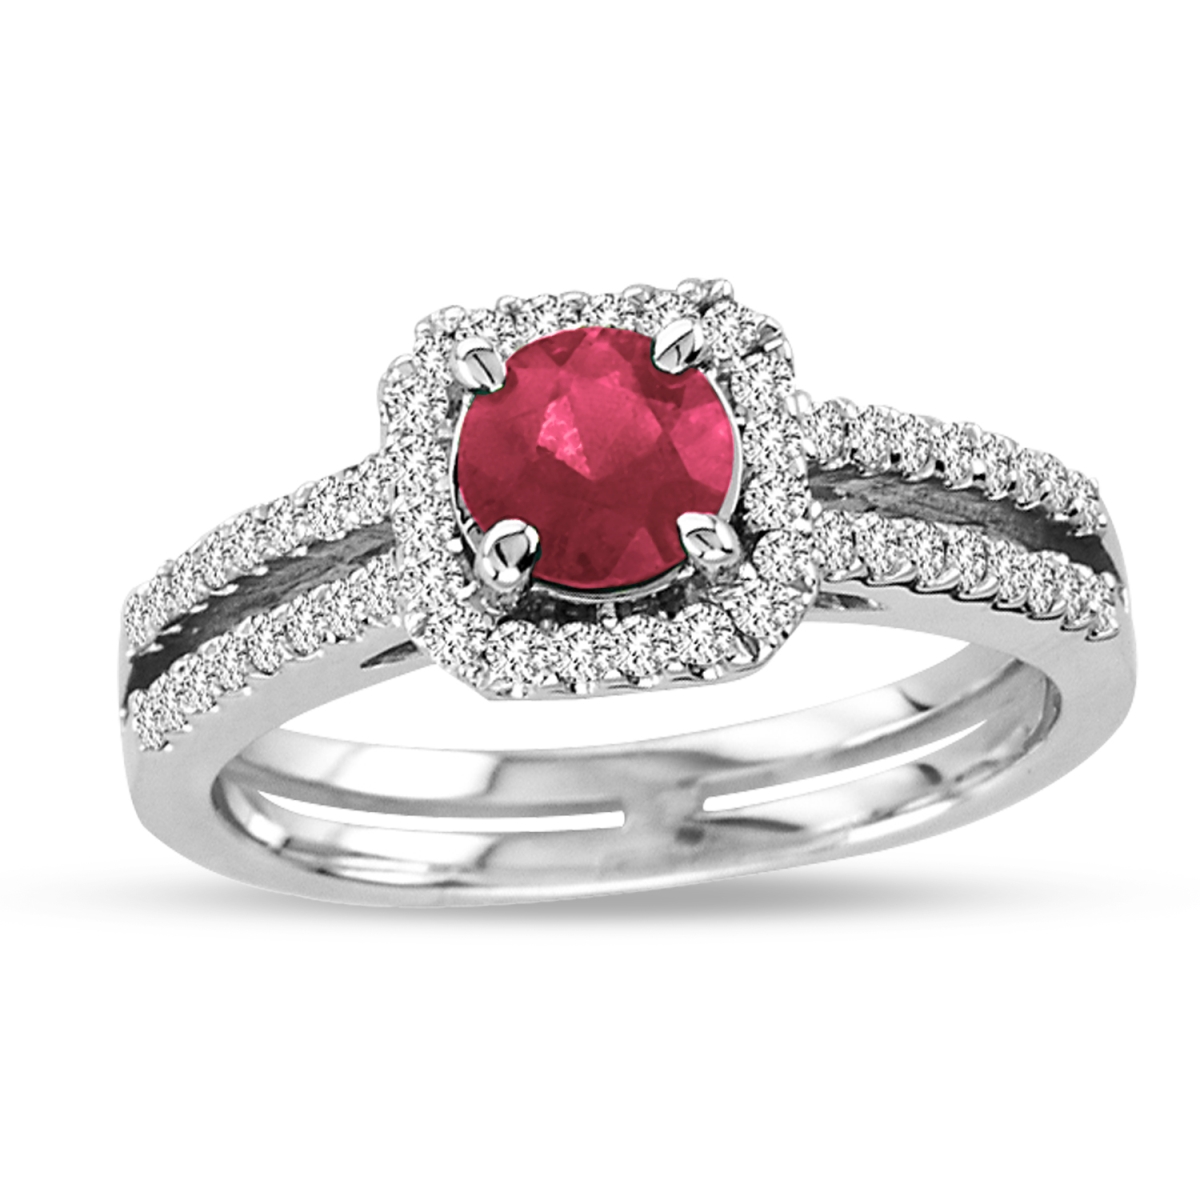 Picture of Louis Creations RL1140RD-5.5 14K Gold Ring with 0.75 CT Natural Heated Ruby & 0.40 CTTW of Round Diamonds Rings - Size 5.5